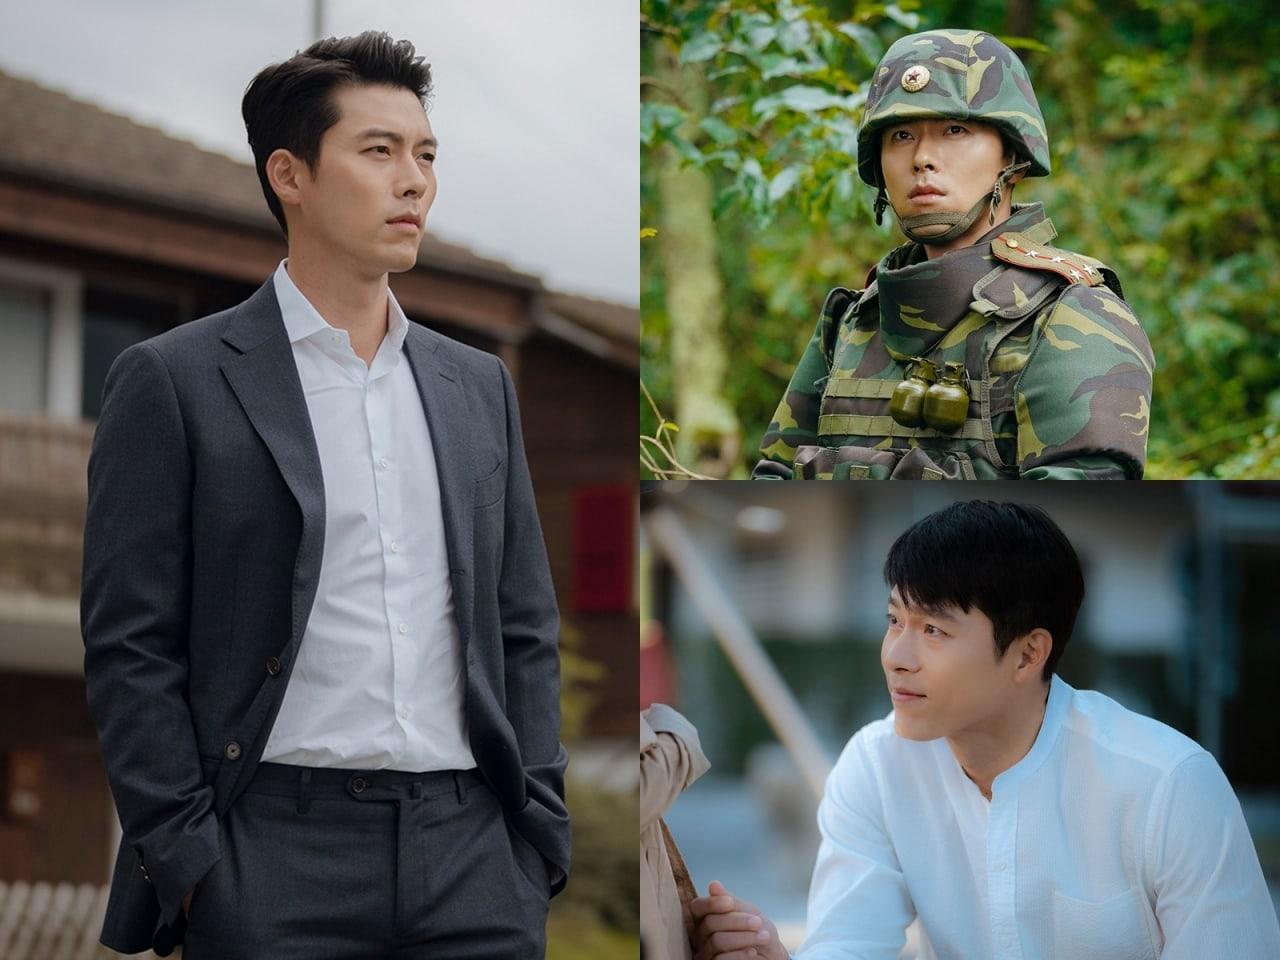 Hyun Bin Shares What Draws Him To His Character In “Crash